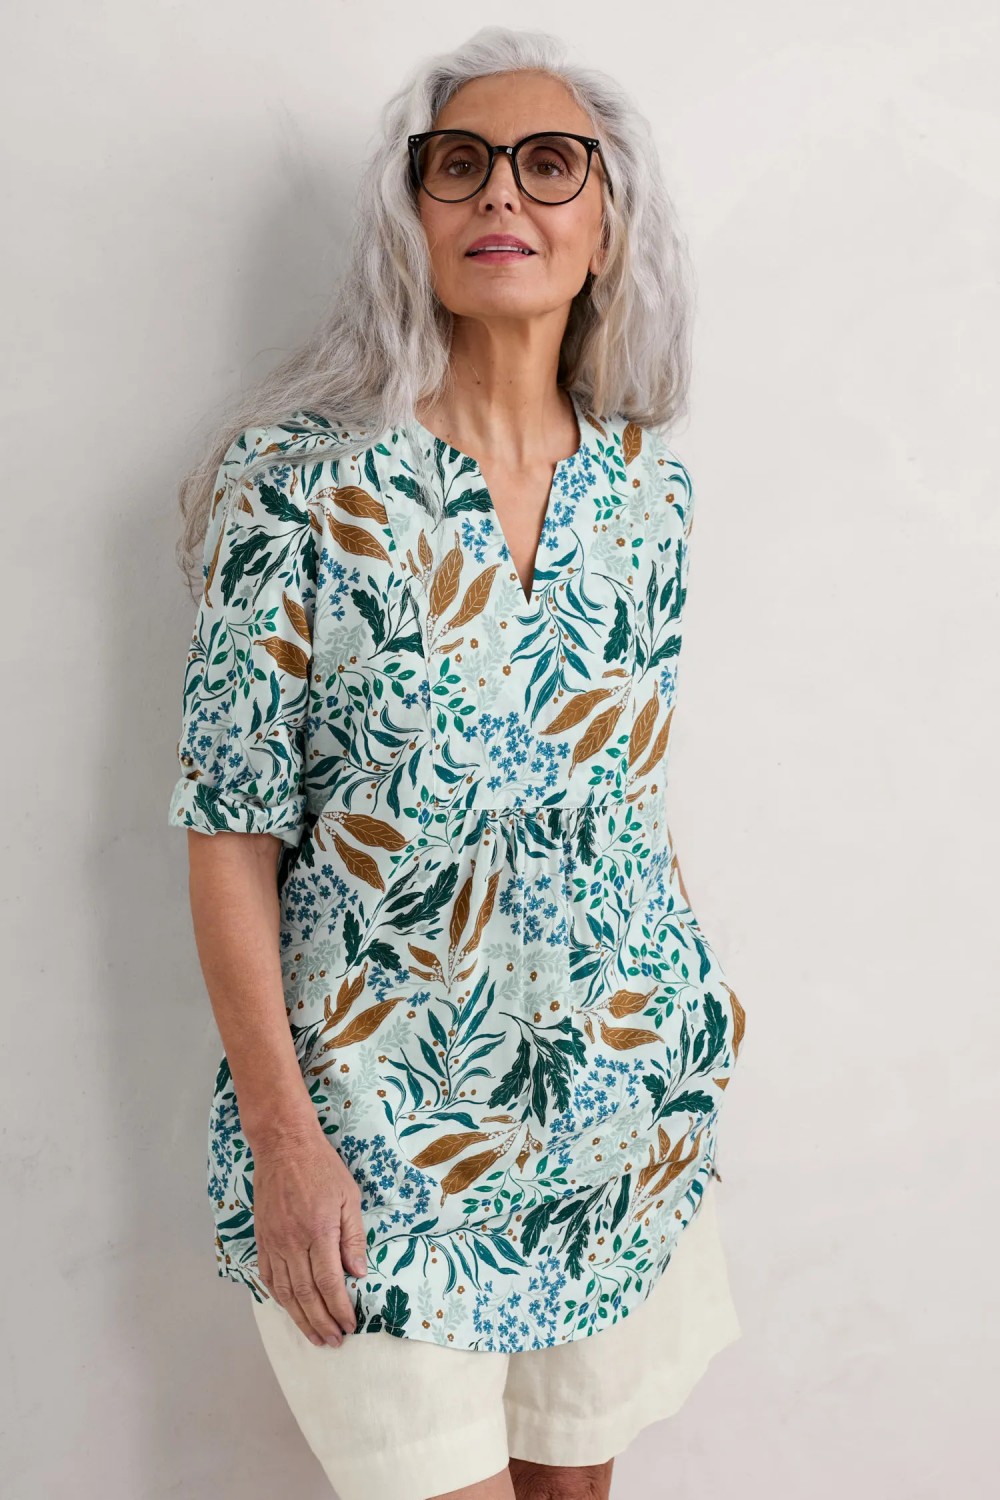 Seasalt Clothing Op Art Organic Cotton Tunic Top Riverbed Floral Chalk